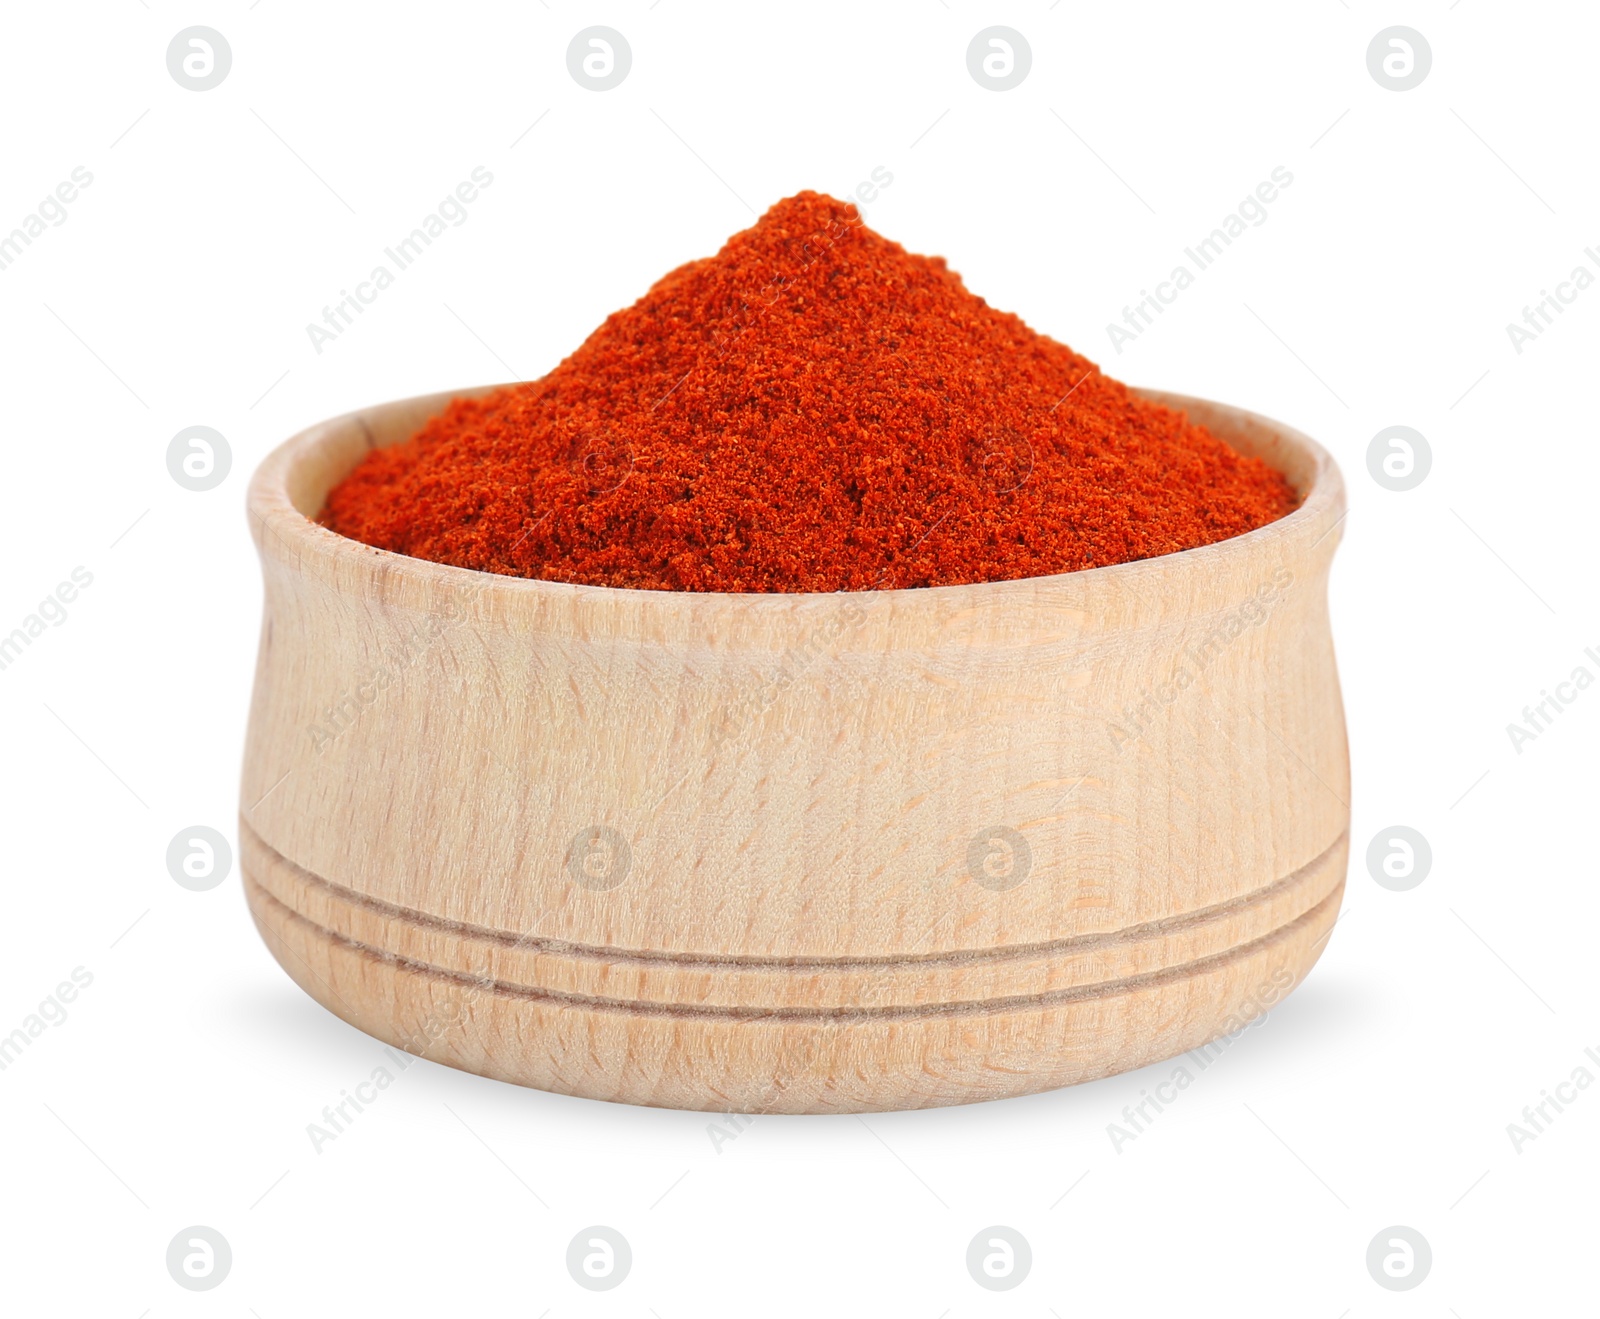 Photo of Bowl with aromatic paprika powder isolated on white